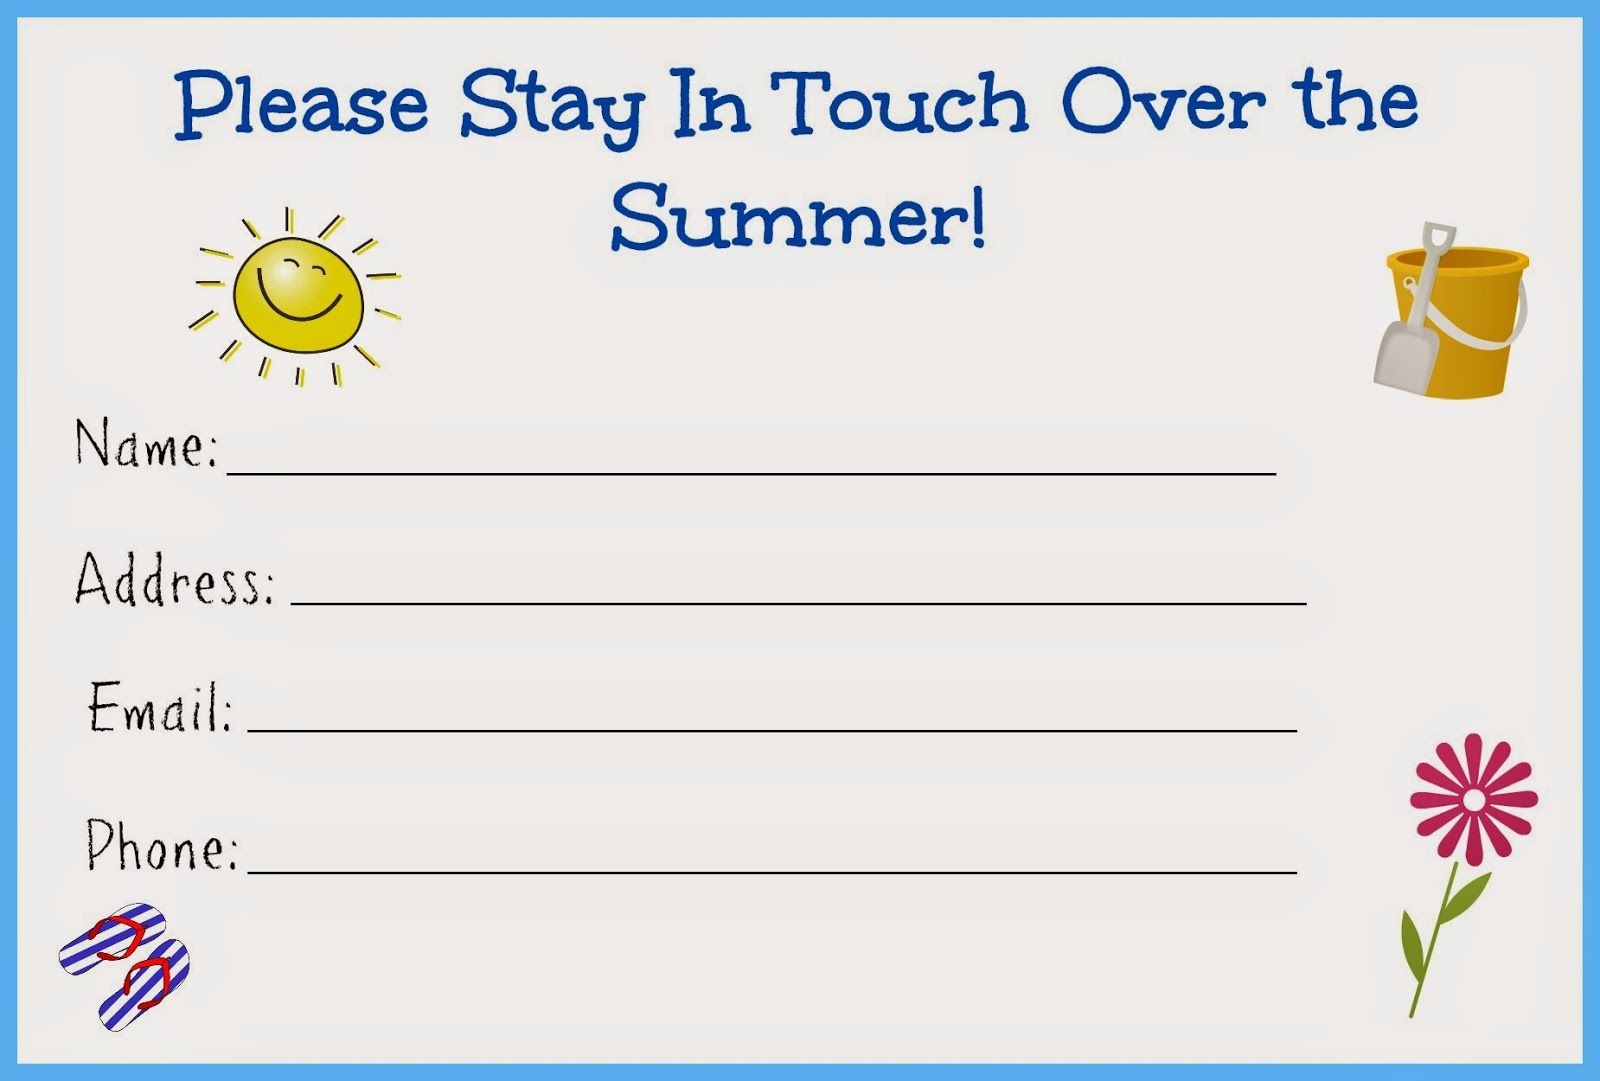 Stay In Touch Over The Summer Card For Kids Free Printable Printables Free Kids Free Printable Cards Free Printables